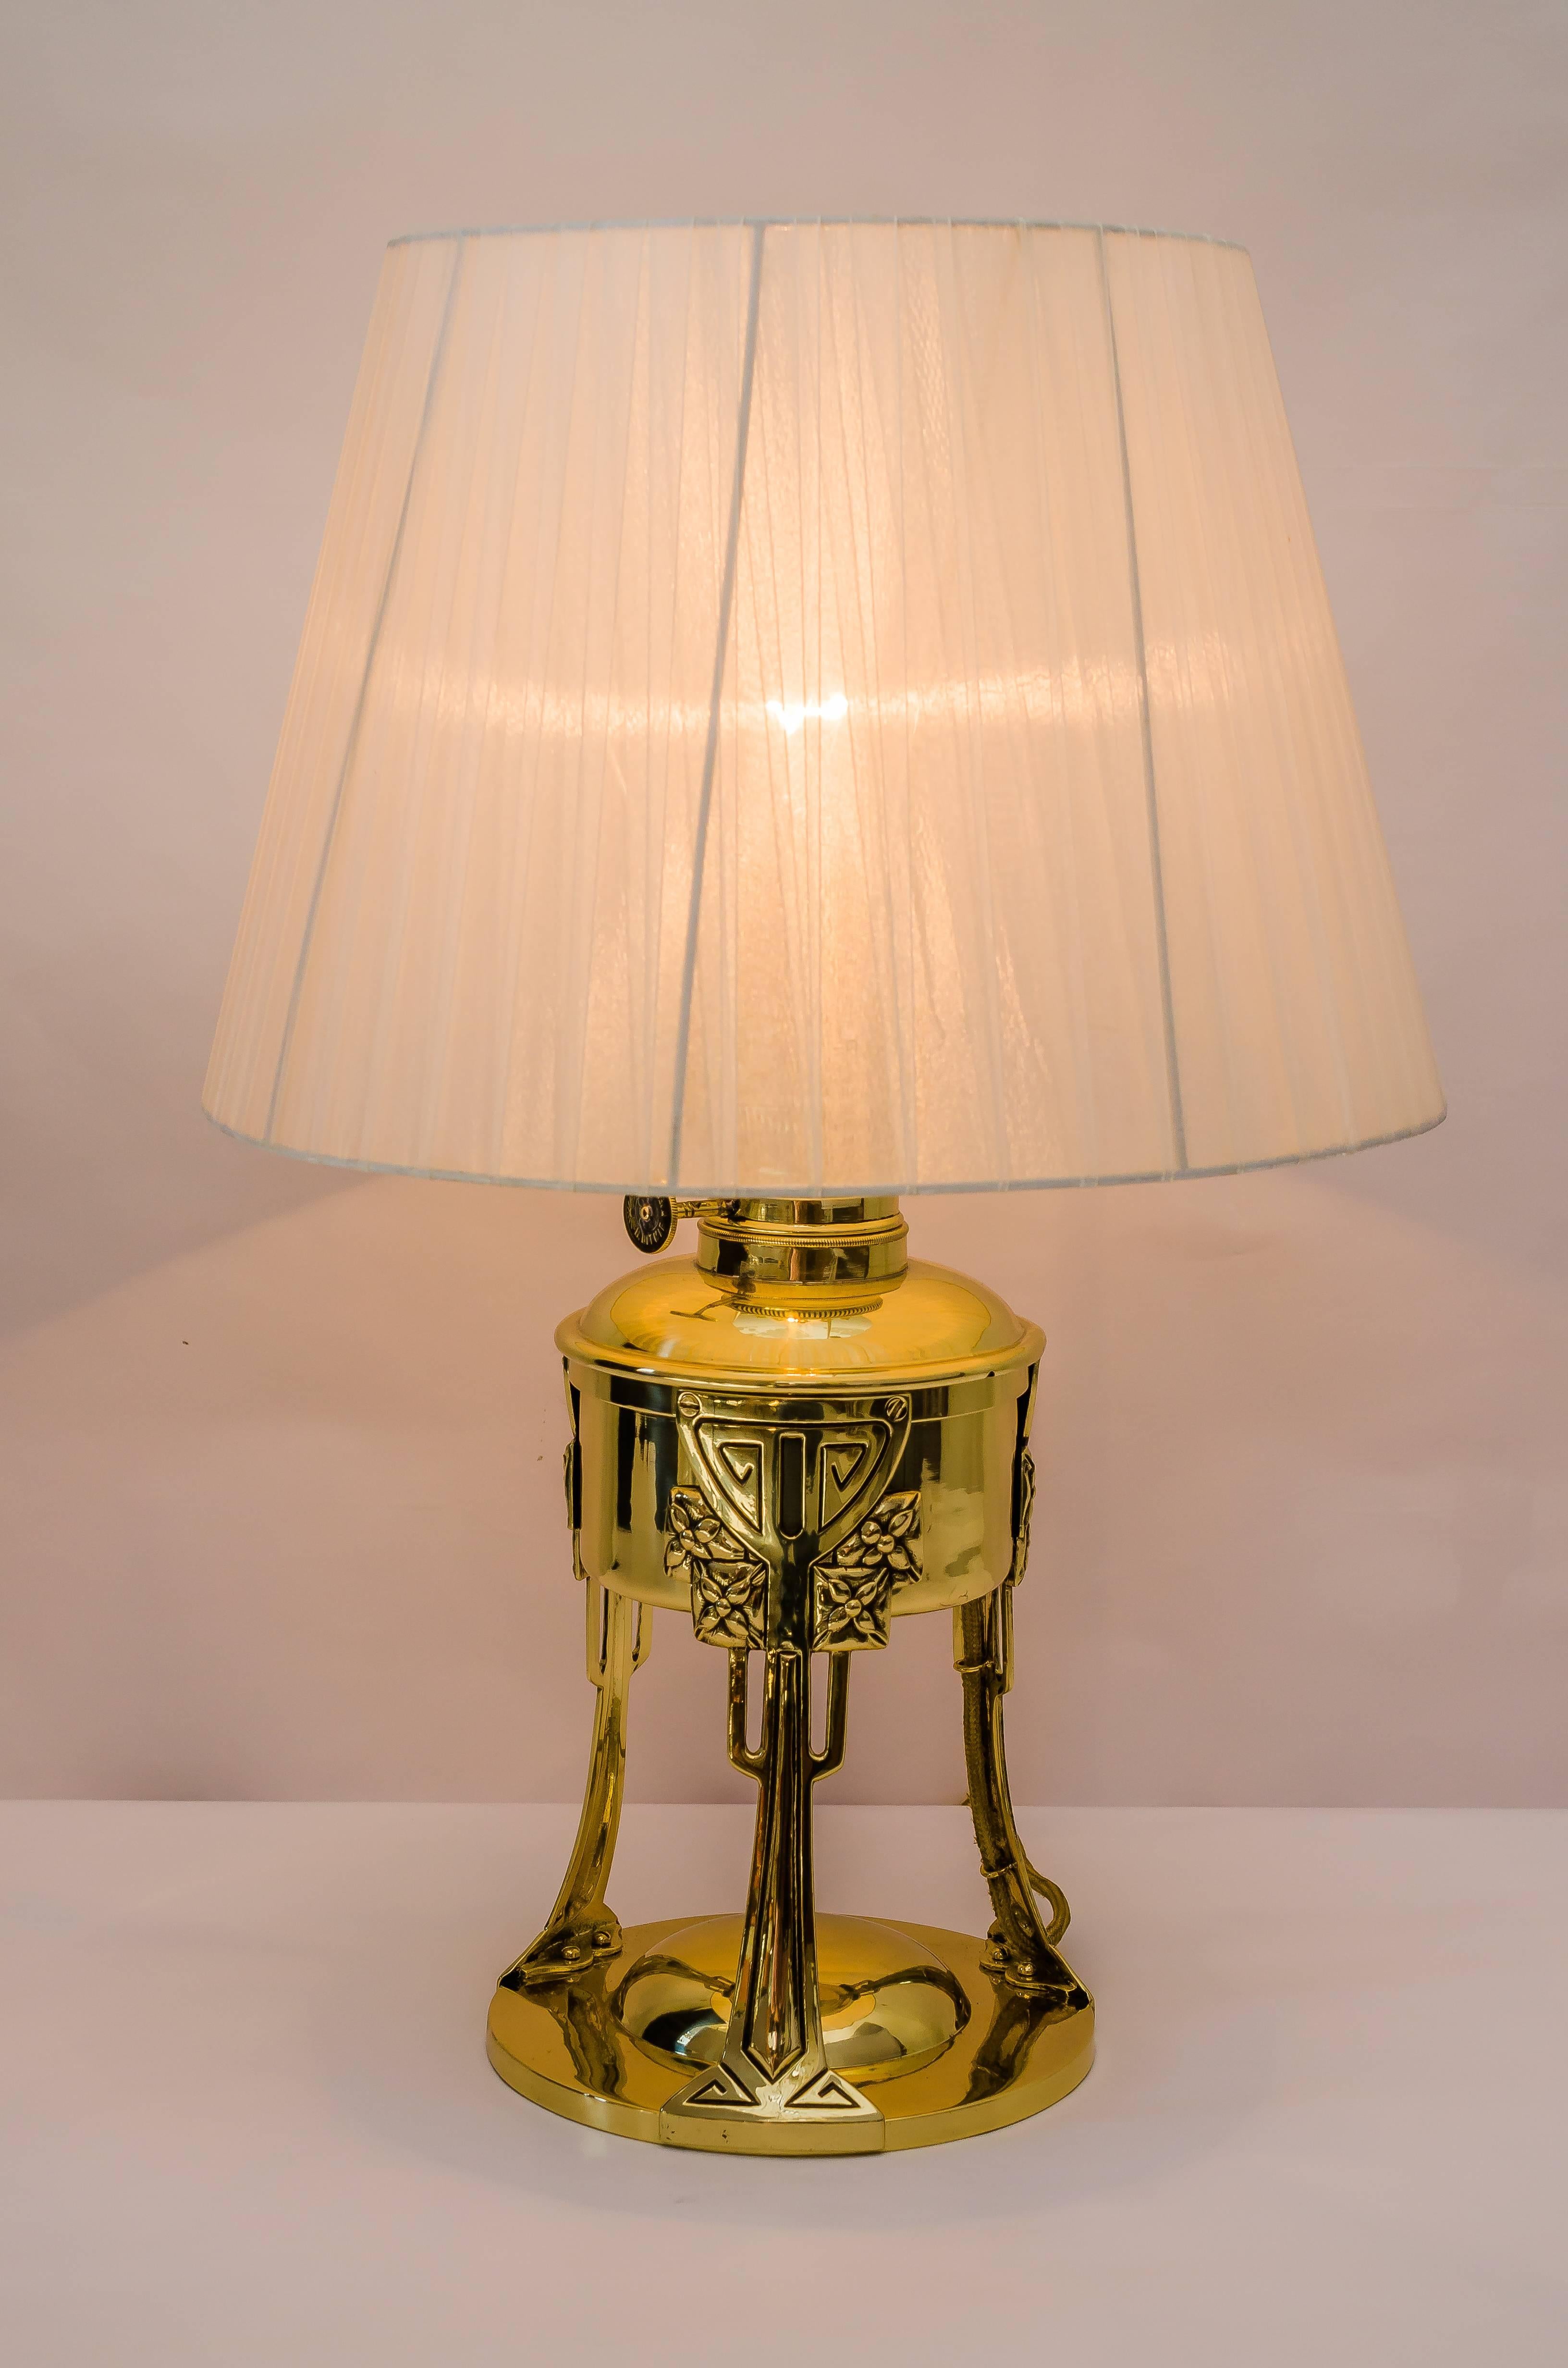 Jugendstil table lamp with fabric shade, 1907
Polished and stove enameled
Fabric shade replaced (new).
 